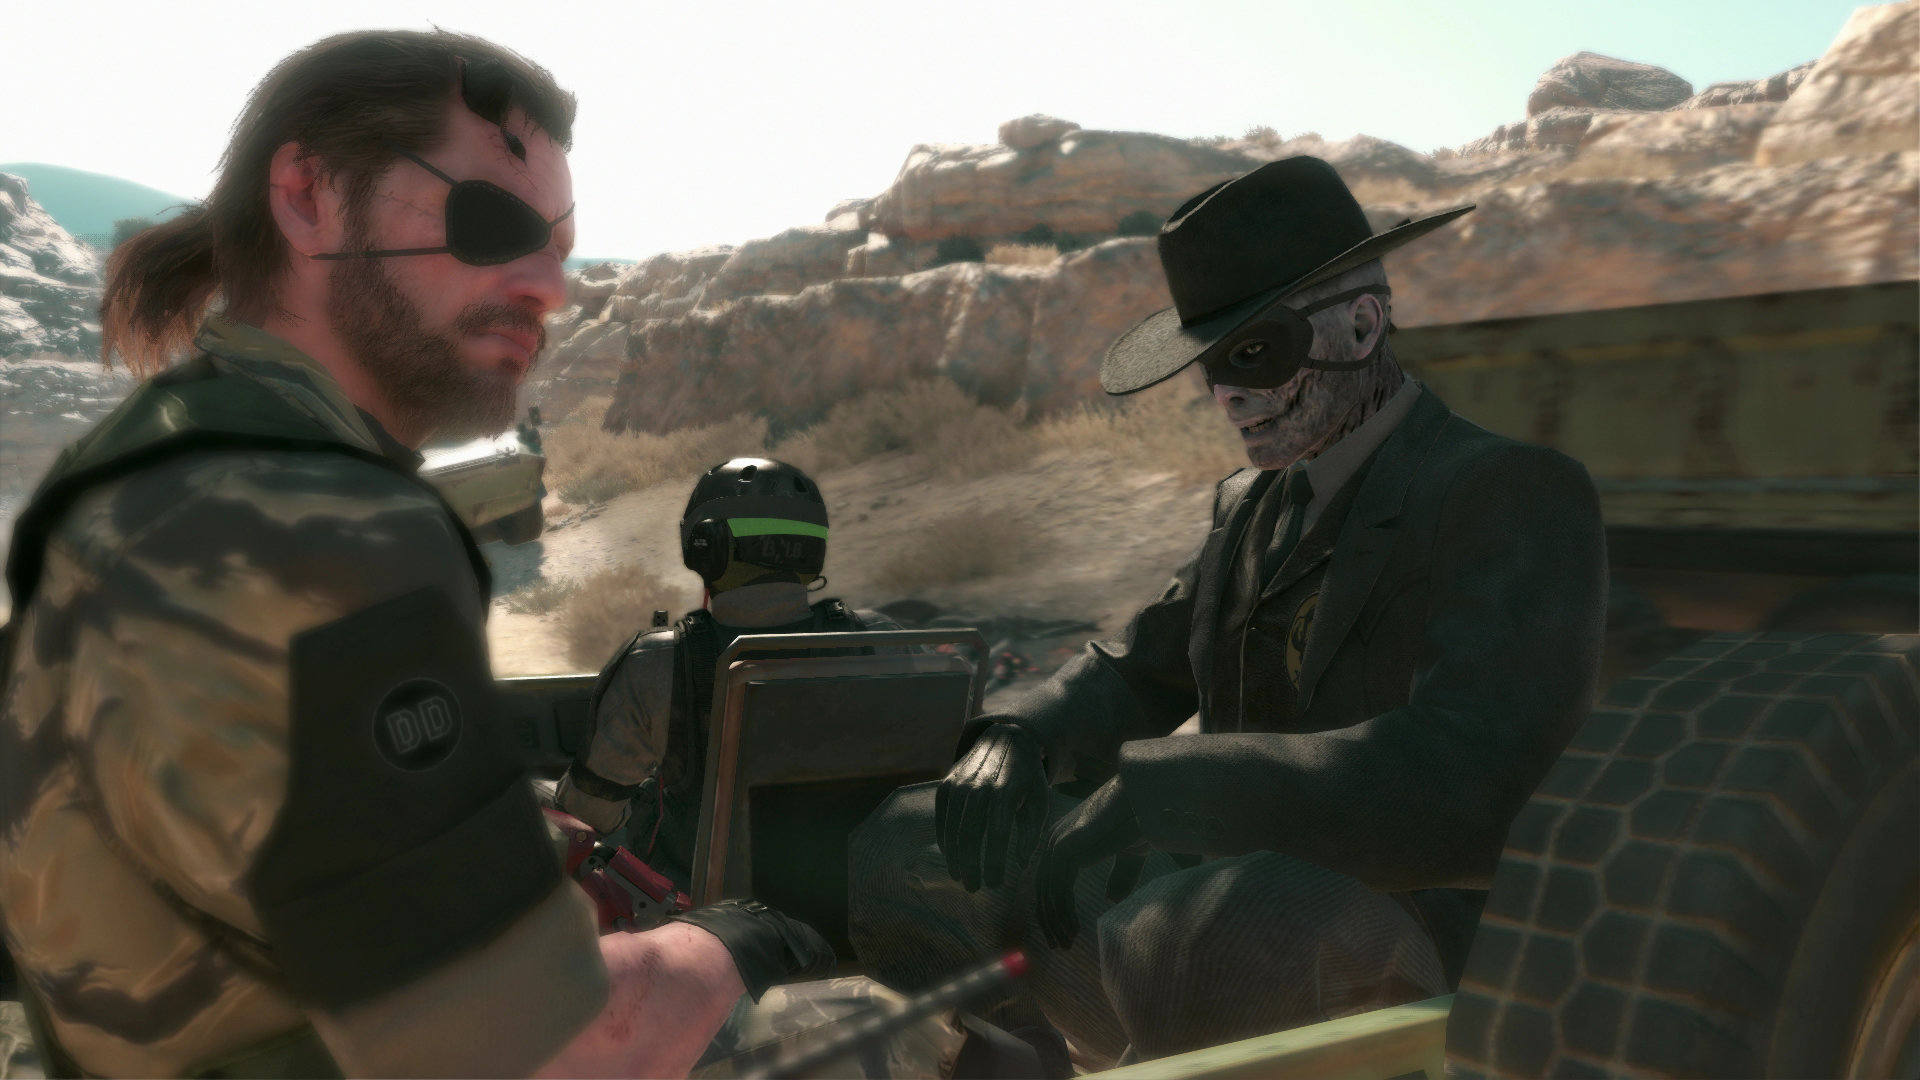 Awesome Metal Gear Solid 5 (V): The Phantom Pain (MGSV 5) free background ID:460437 for full hd 1080p PC